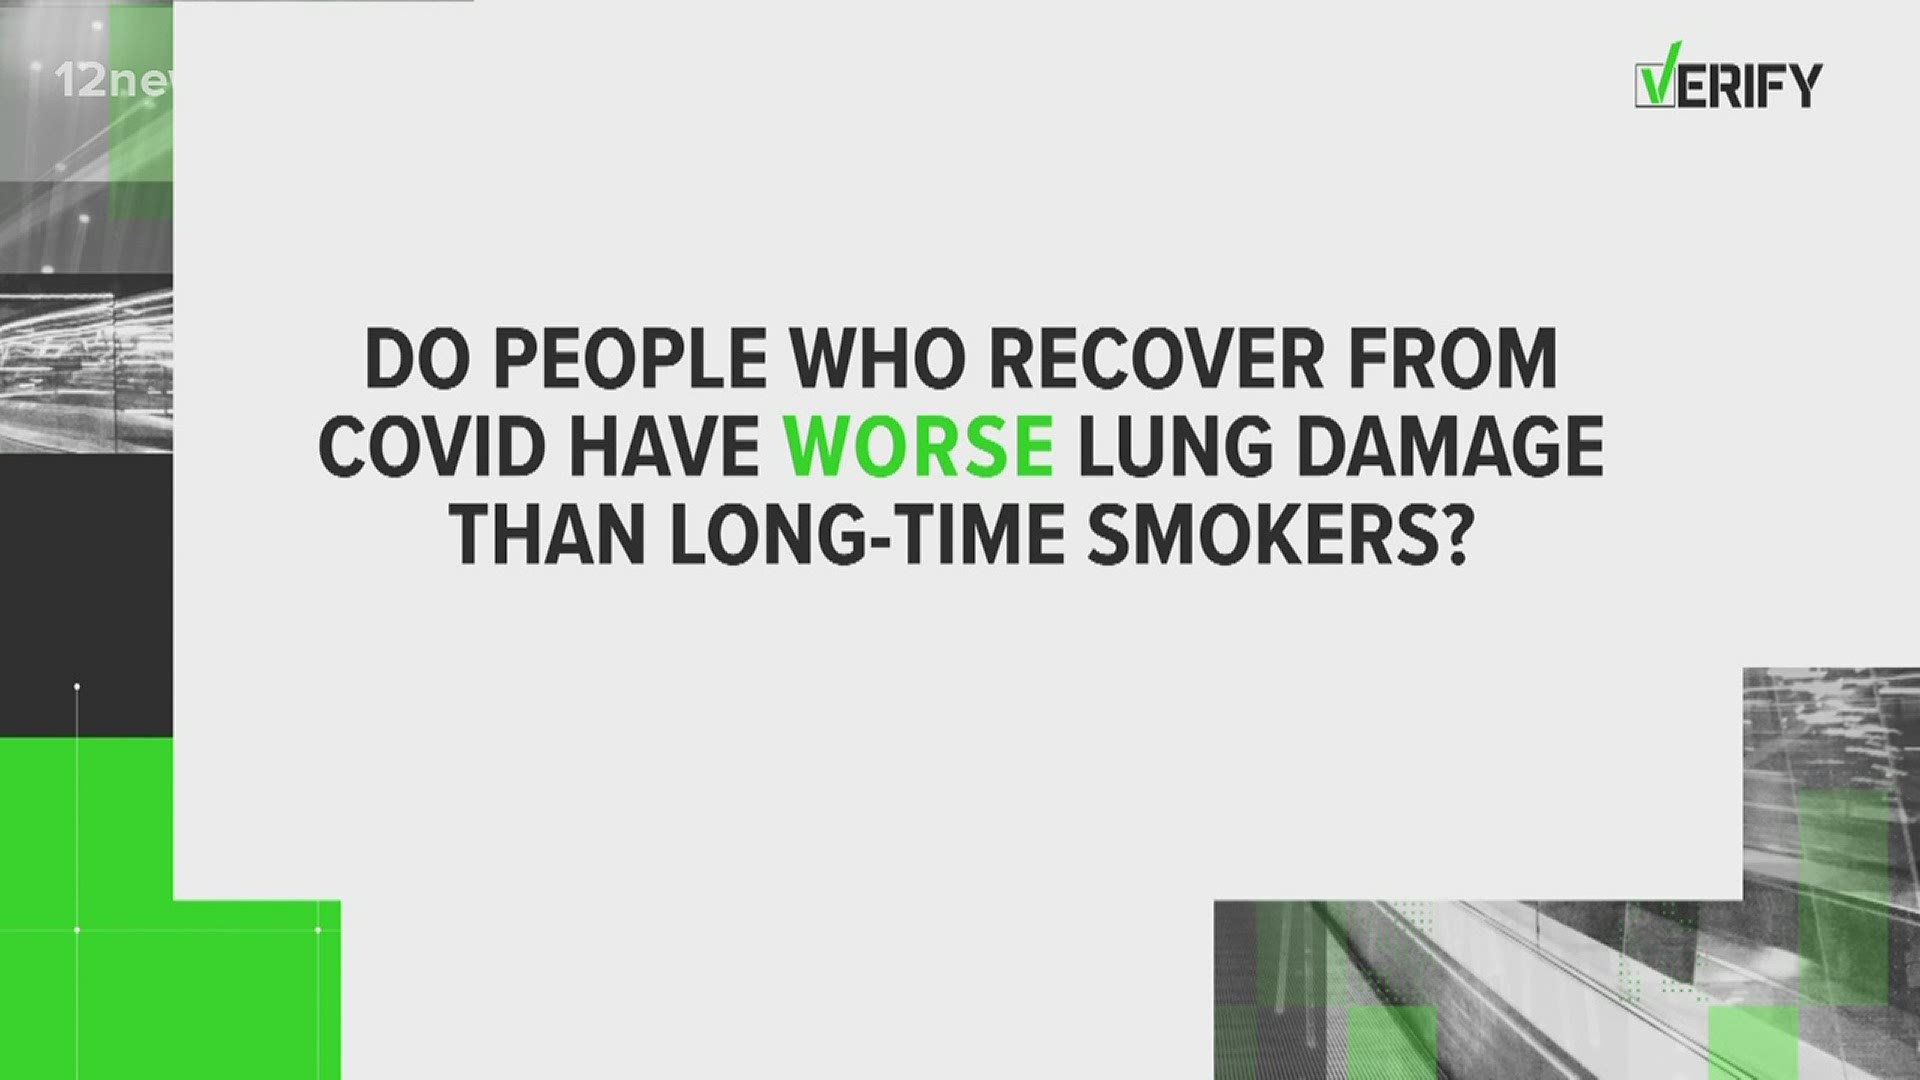 People who recover from severe COVID-19 have worse lung damage than habitual smokers.